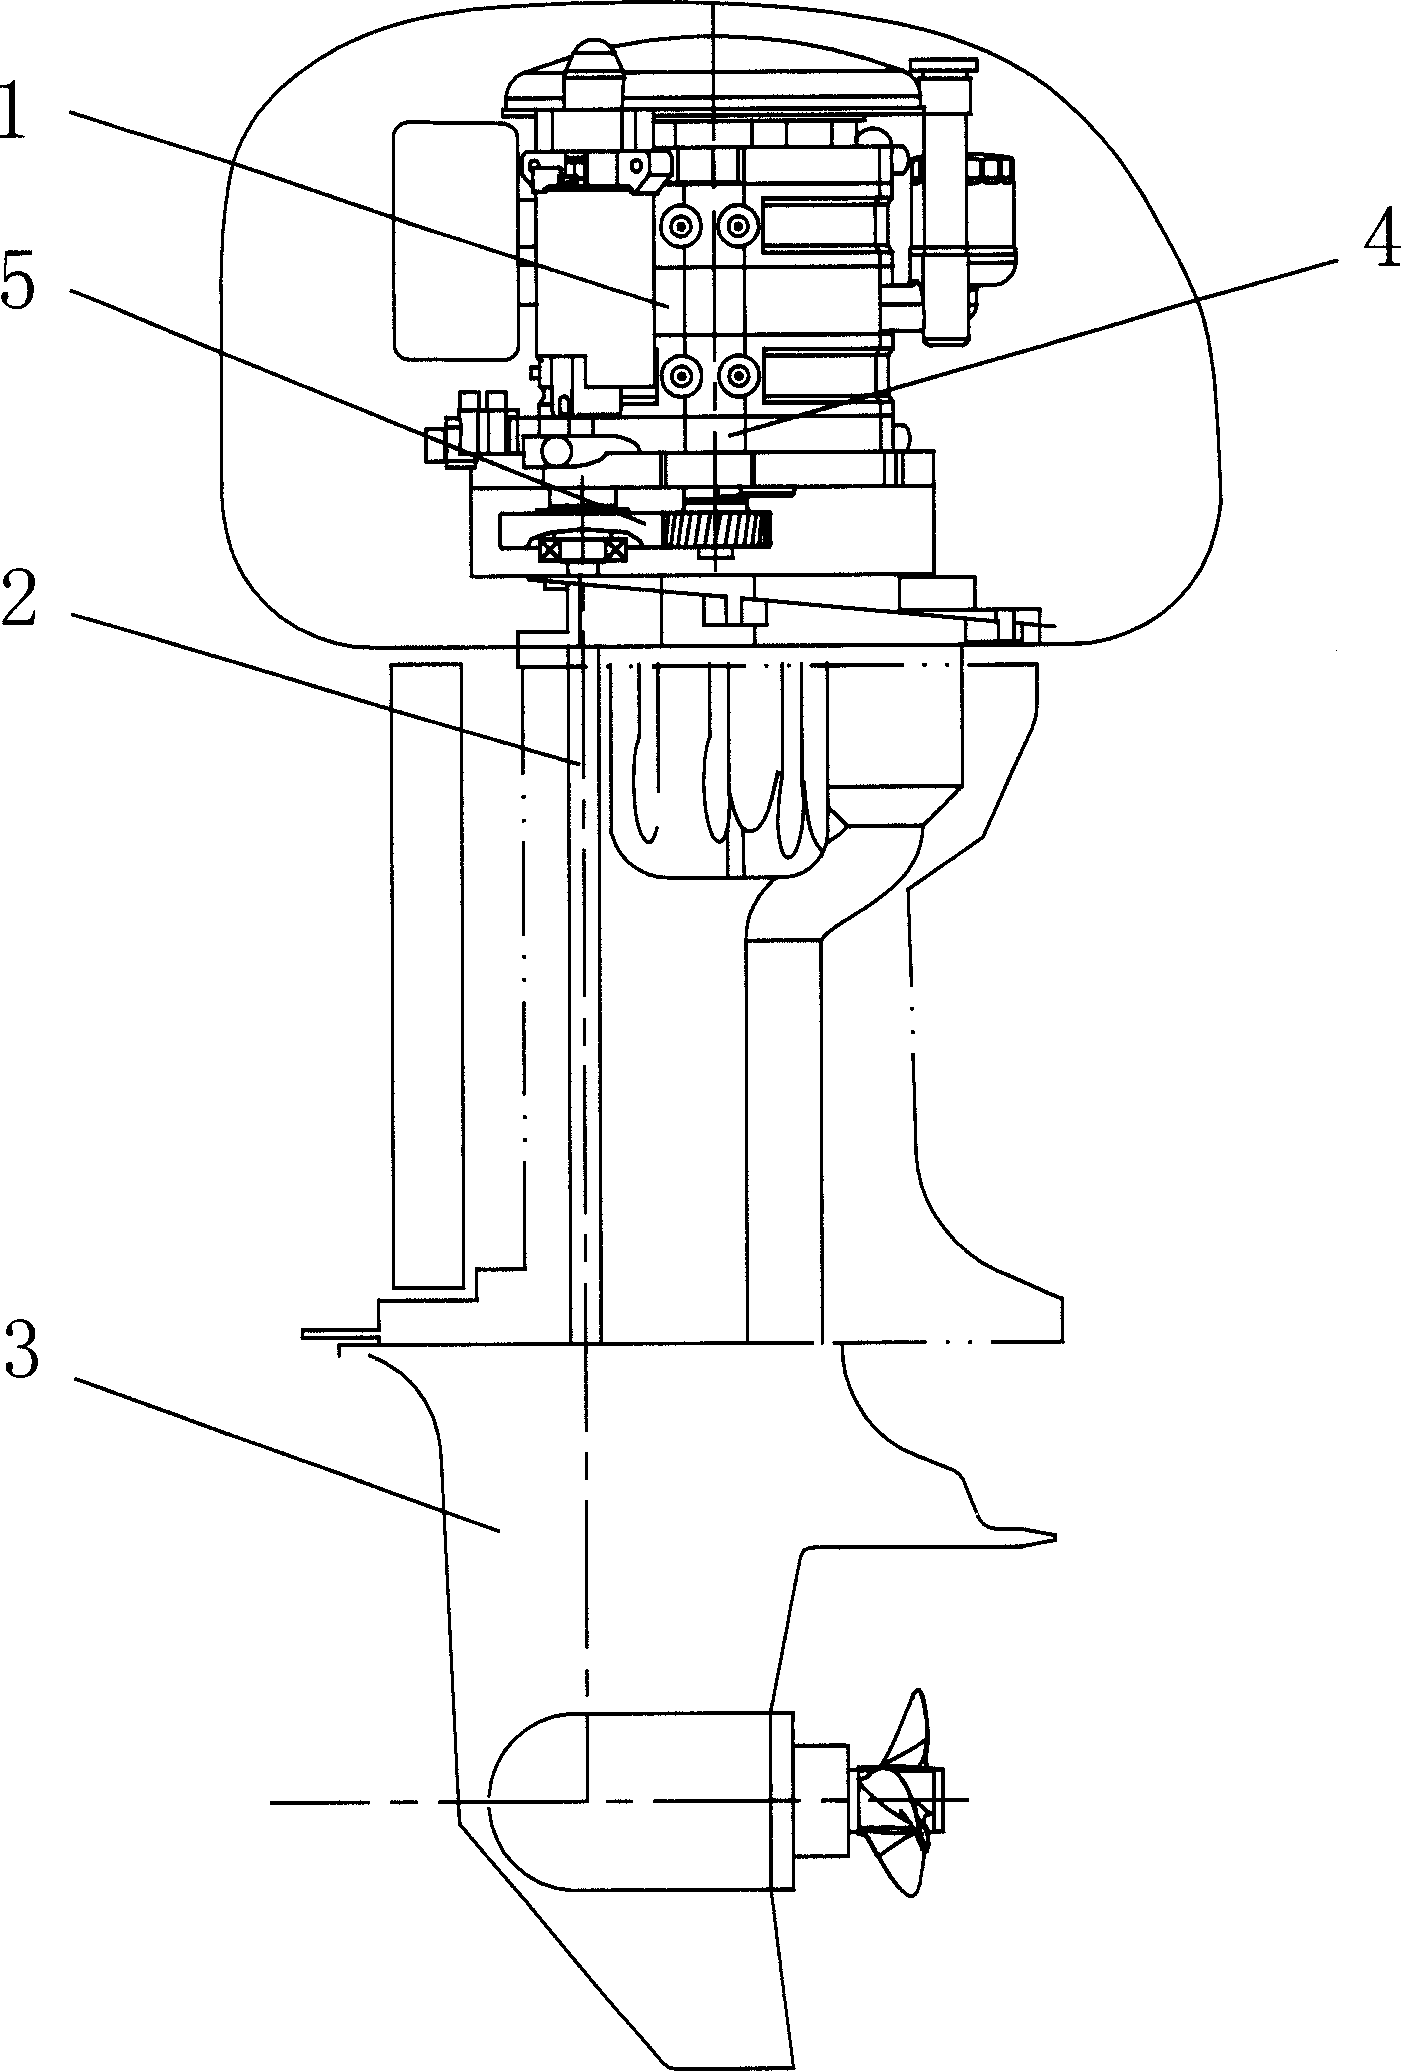 Outboard machine driven by triangle rotor engine